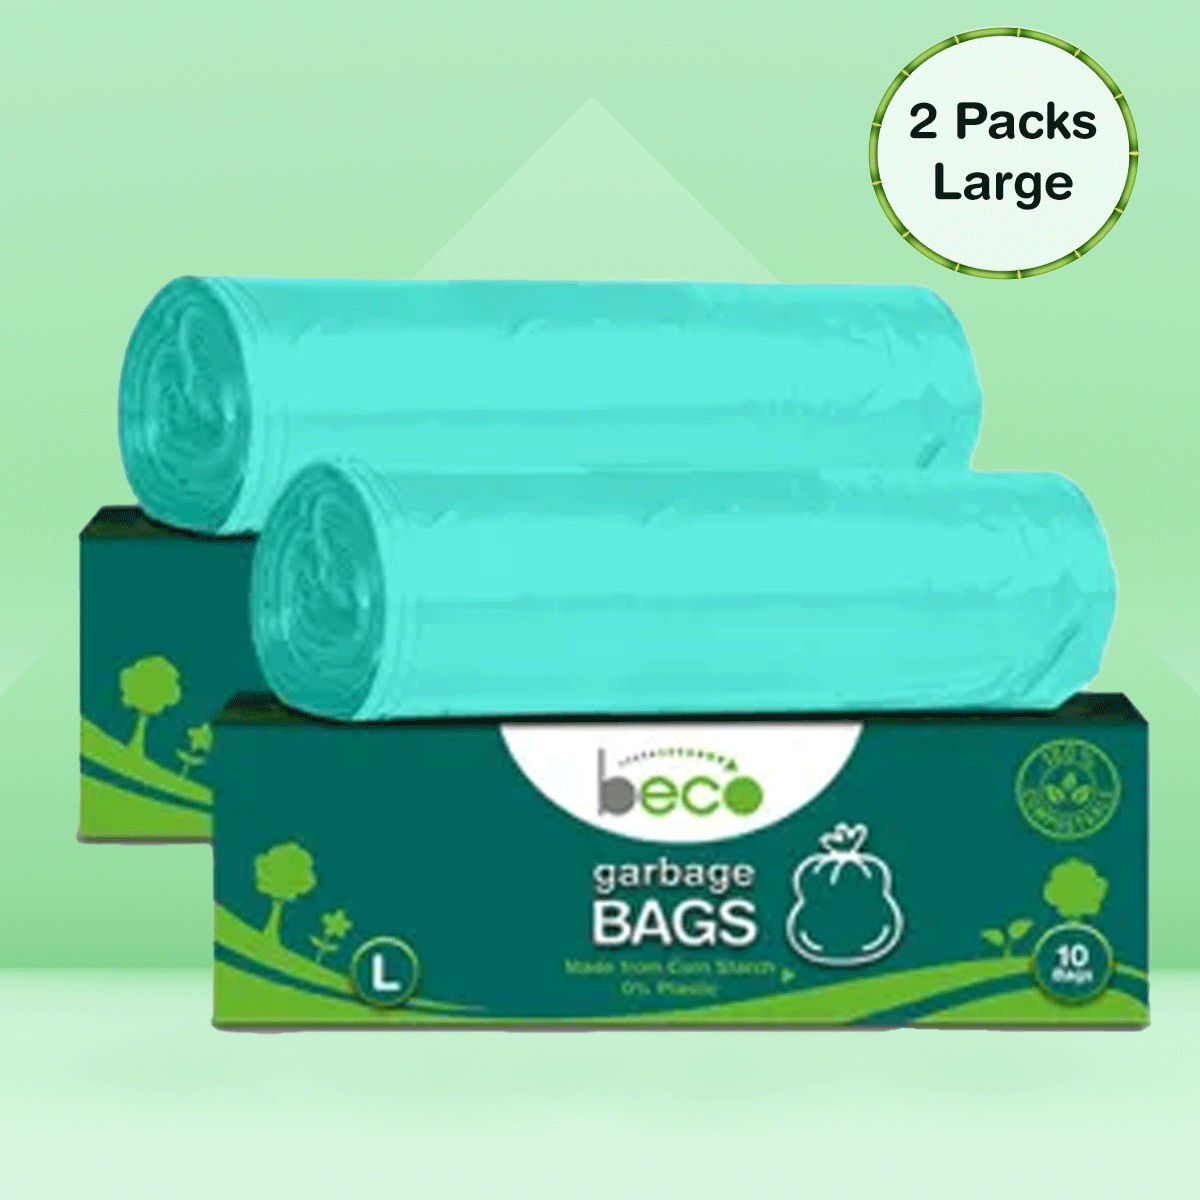 Biodegradable Garbage Bags Compostable - Pack of 2 - Large 